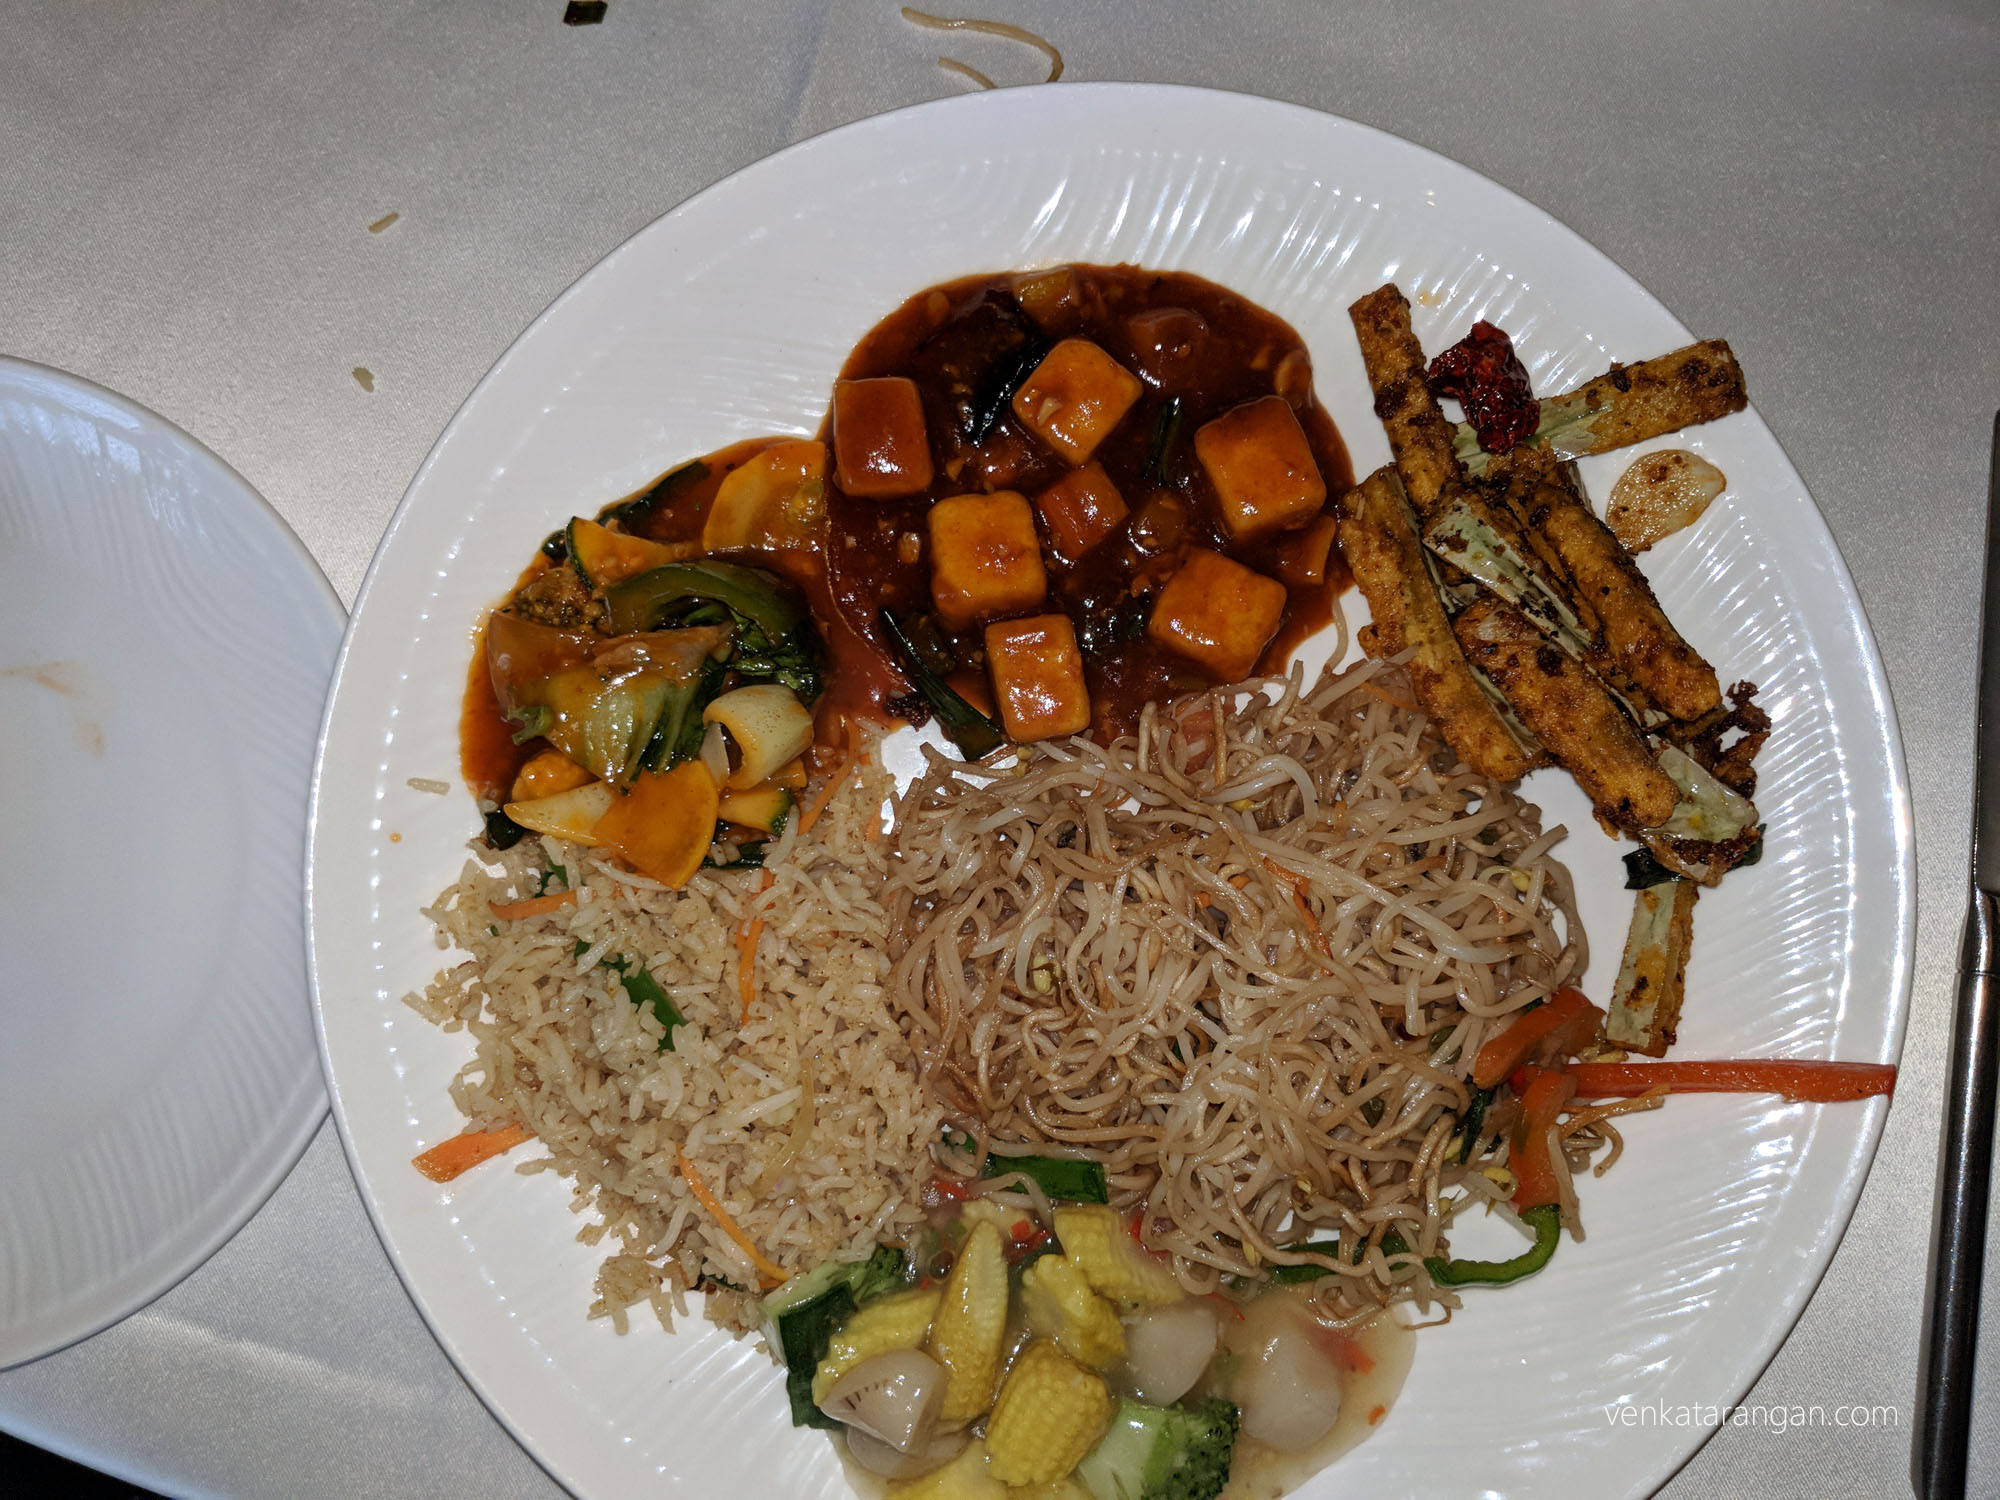 Vegetable Lhothe, Spring Roll, Crispy Lotus Stem (the speciality of this place), Fried Rice, Vegetable Noodles, Tofu & Mixed Vegetable